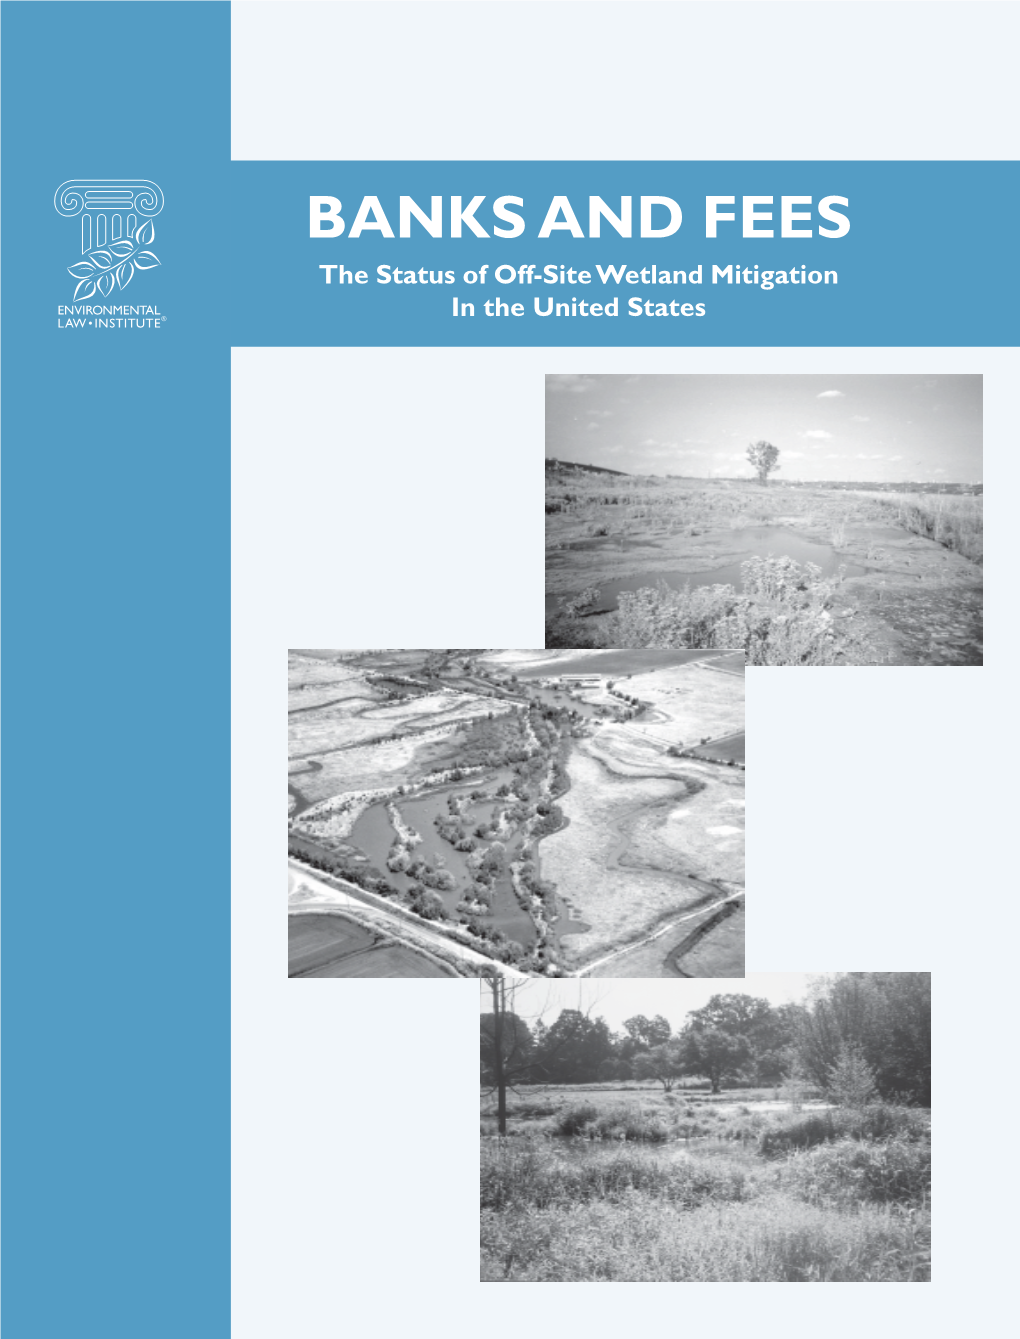 Banks and Fees: the Status of Off-Site Wetland Mitigation in the United States